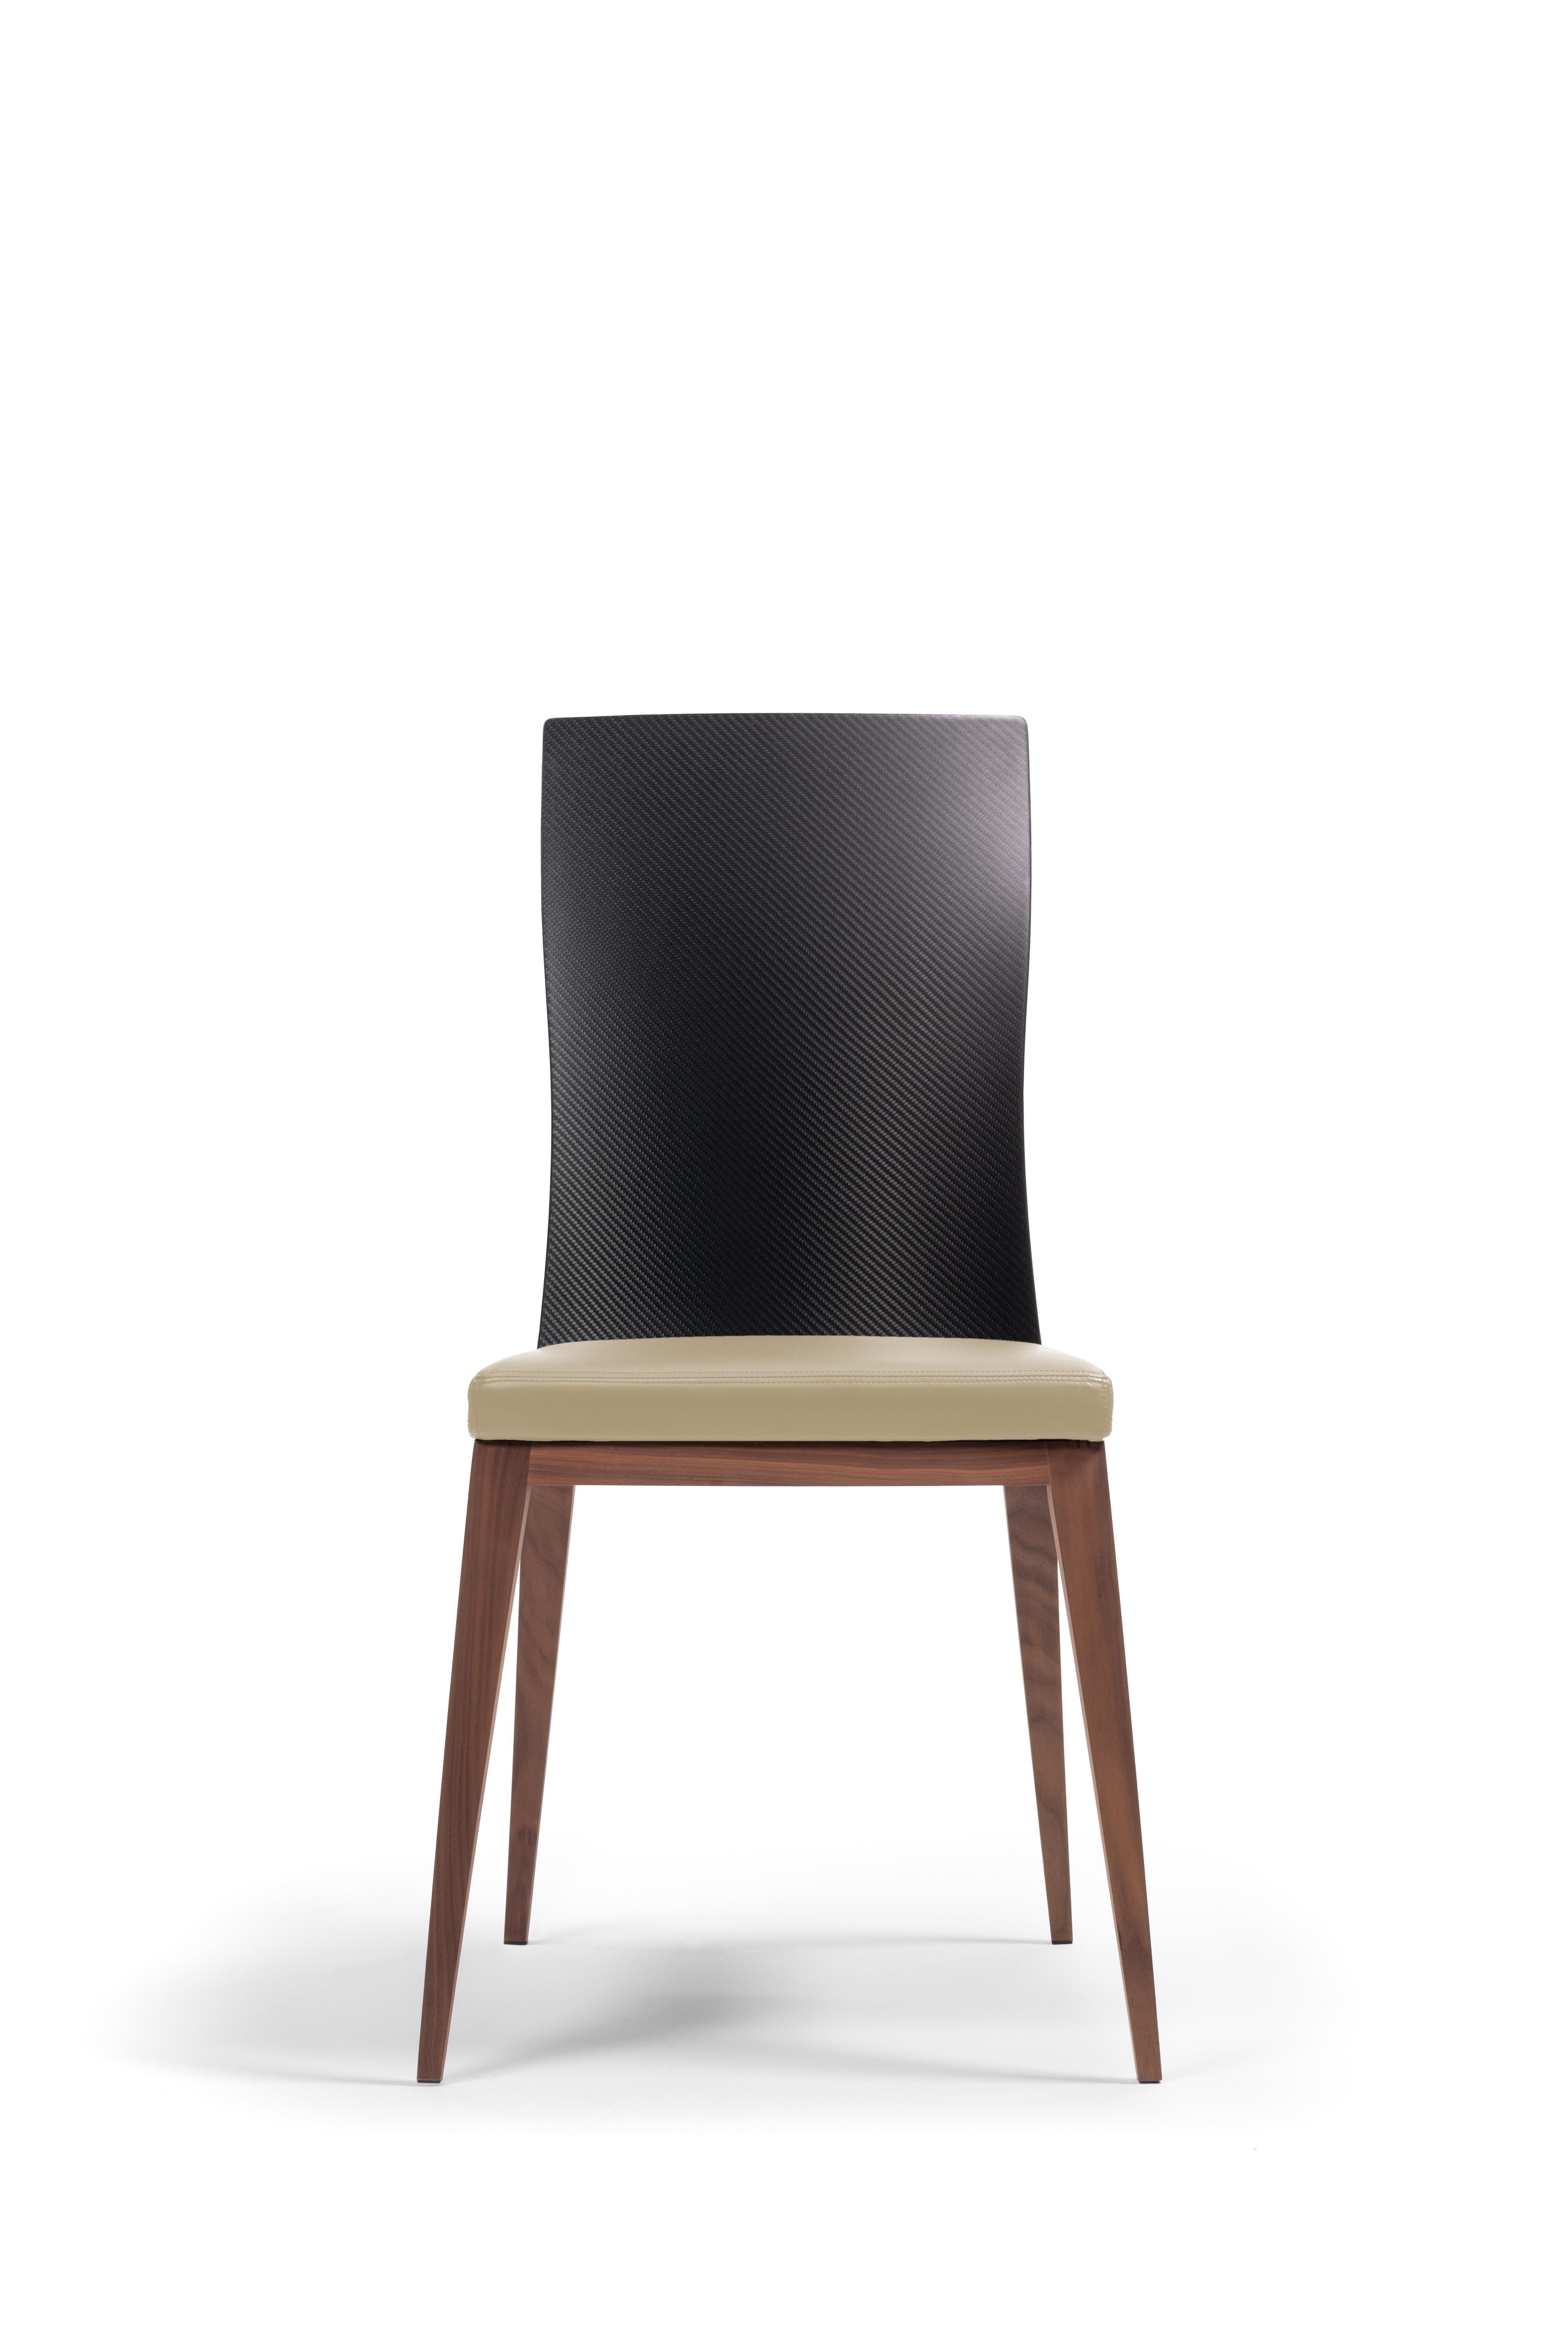 Contemporary Fibra Chair, Design Chair in Carbon Fiber and Canaletto Walnut, Made in Italy For Sale